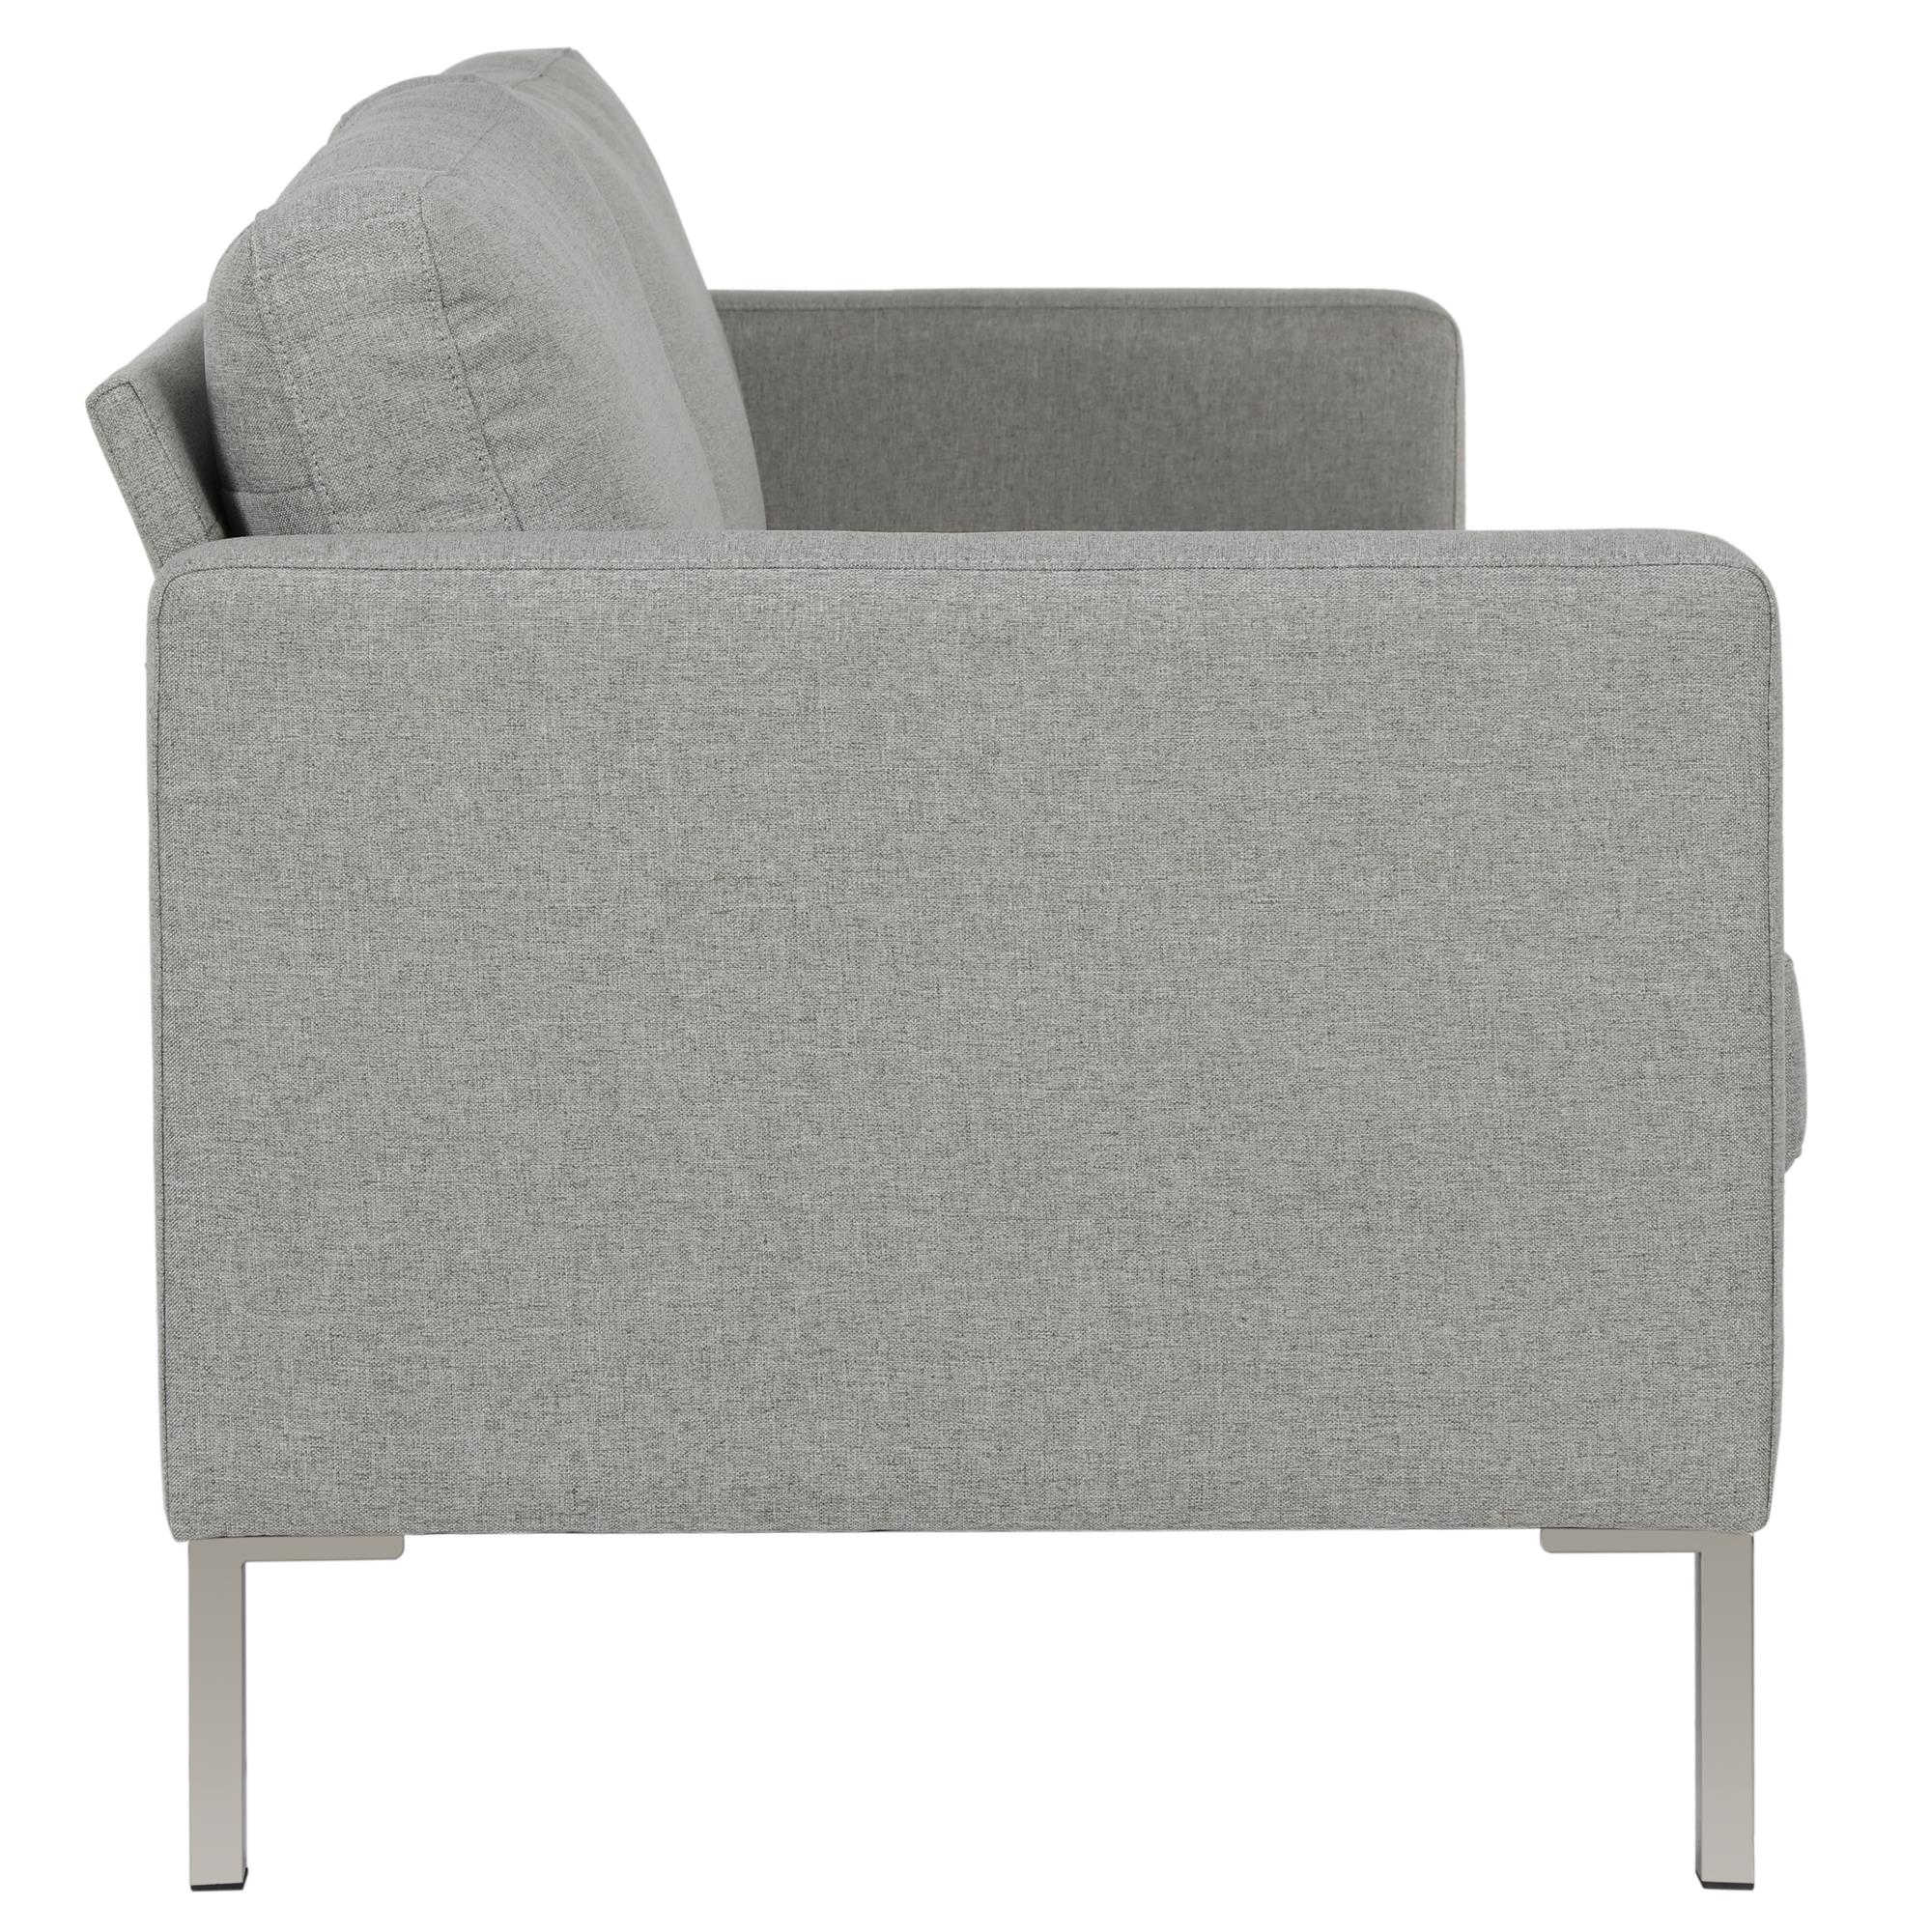 DHP Lexington Modern Sofa & Couch, Living Room Furniture, Gray Linen - image 9 of 15